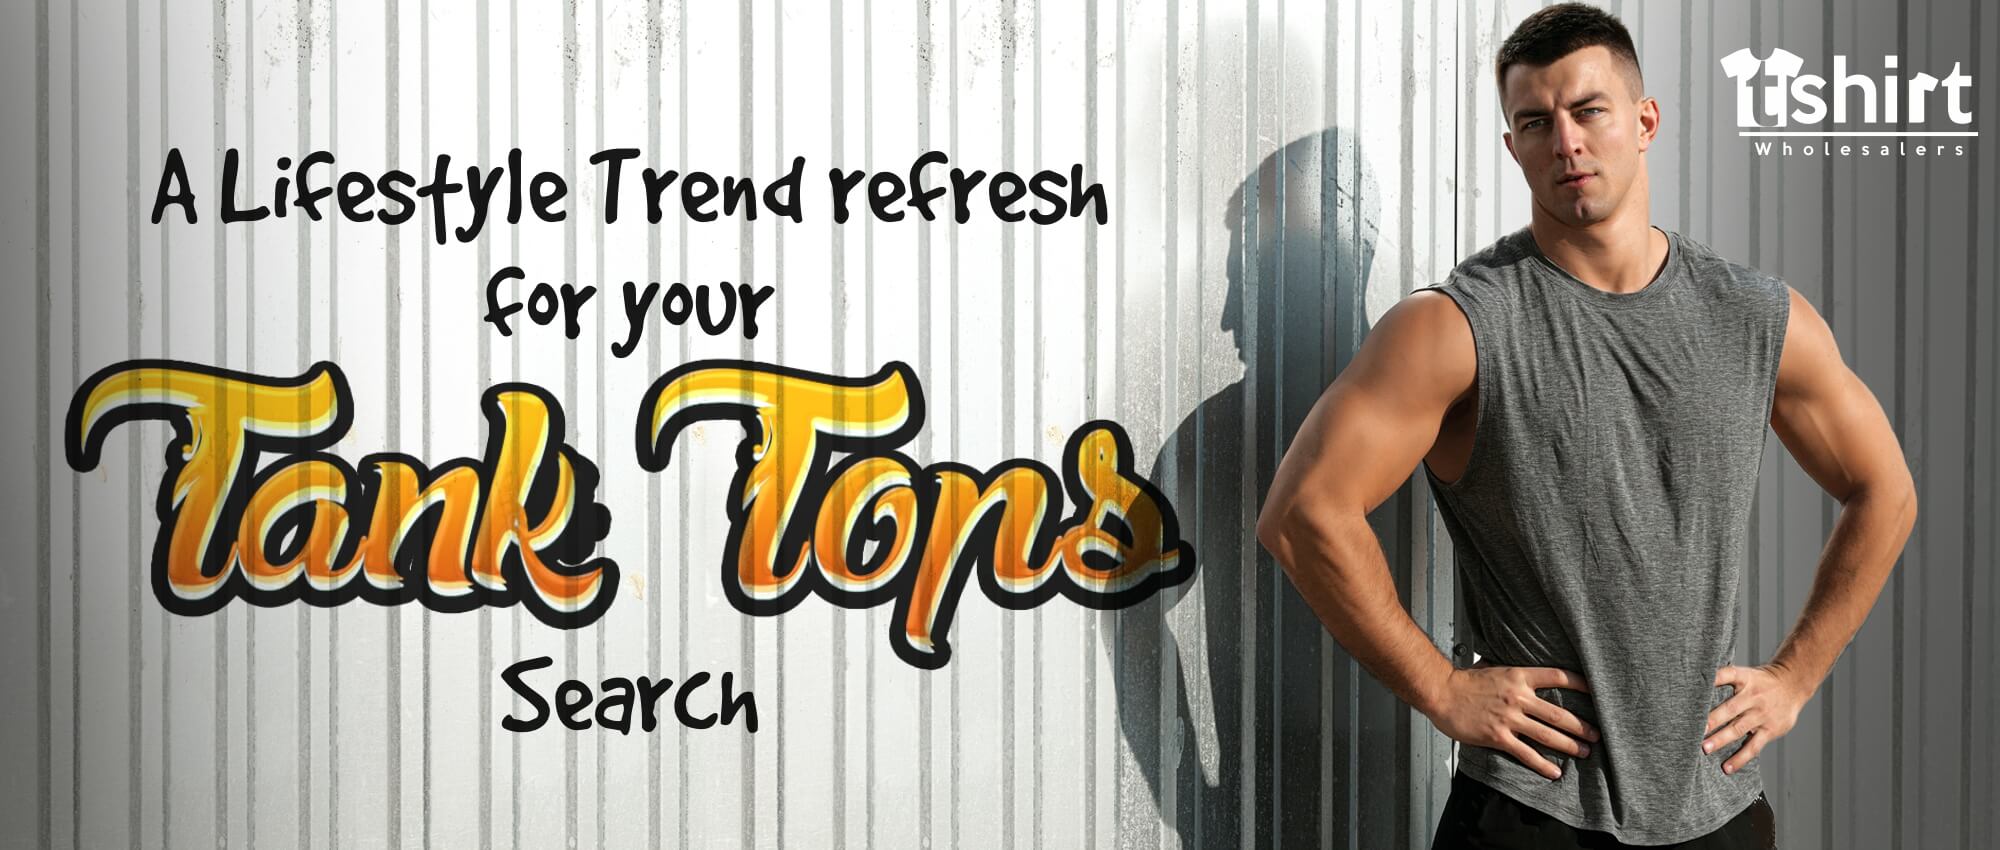 A LIFESTYLE TREND REFRESH FOR YOUR TANK TOPS SEARCH